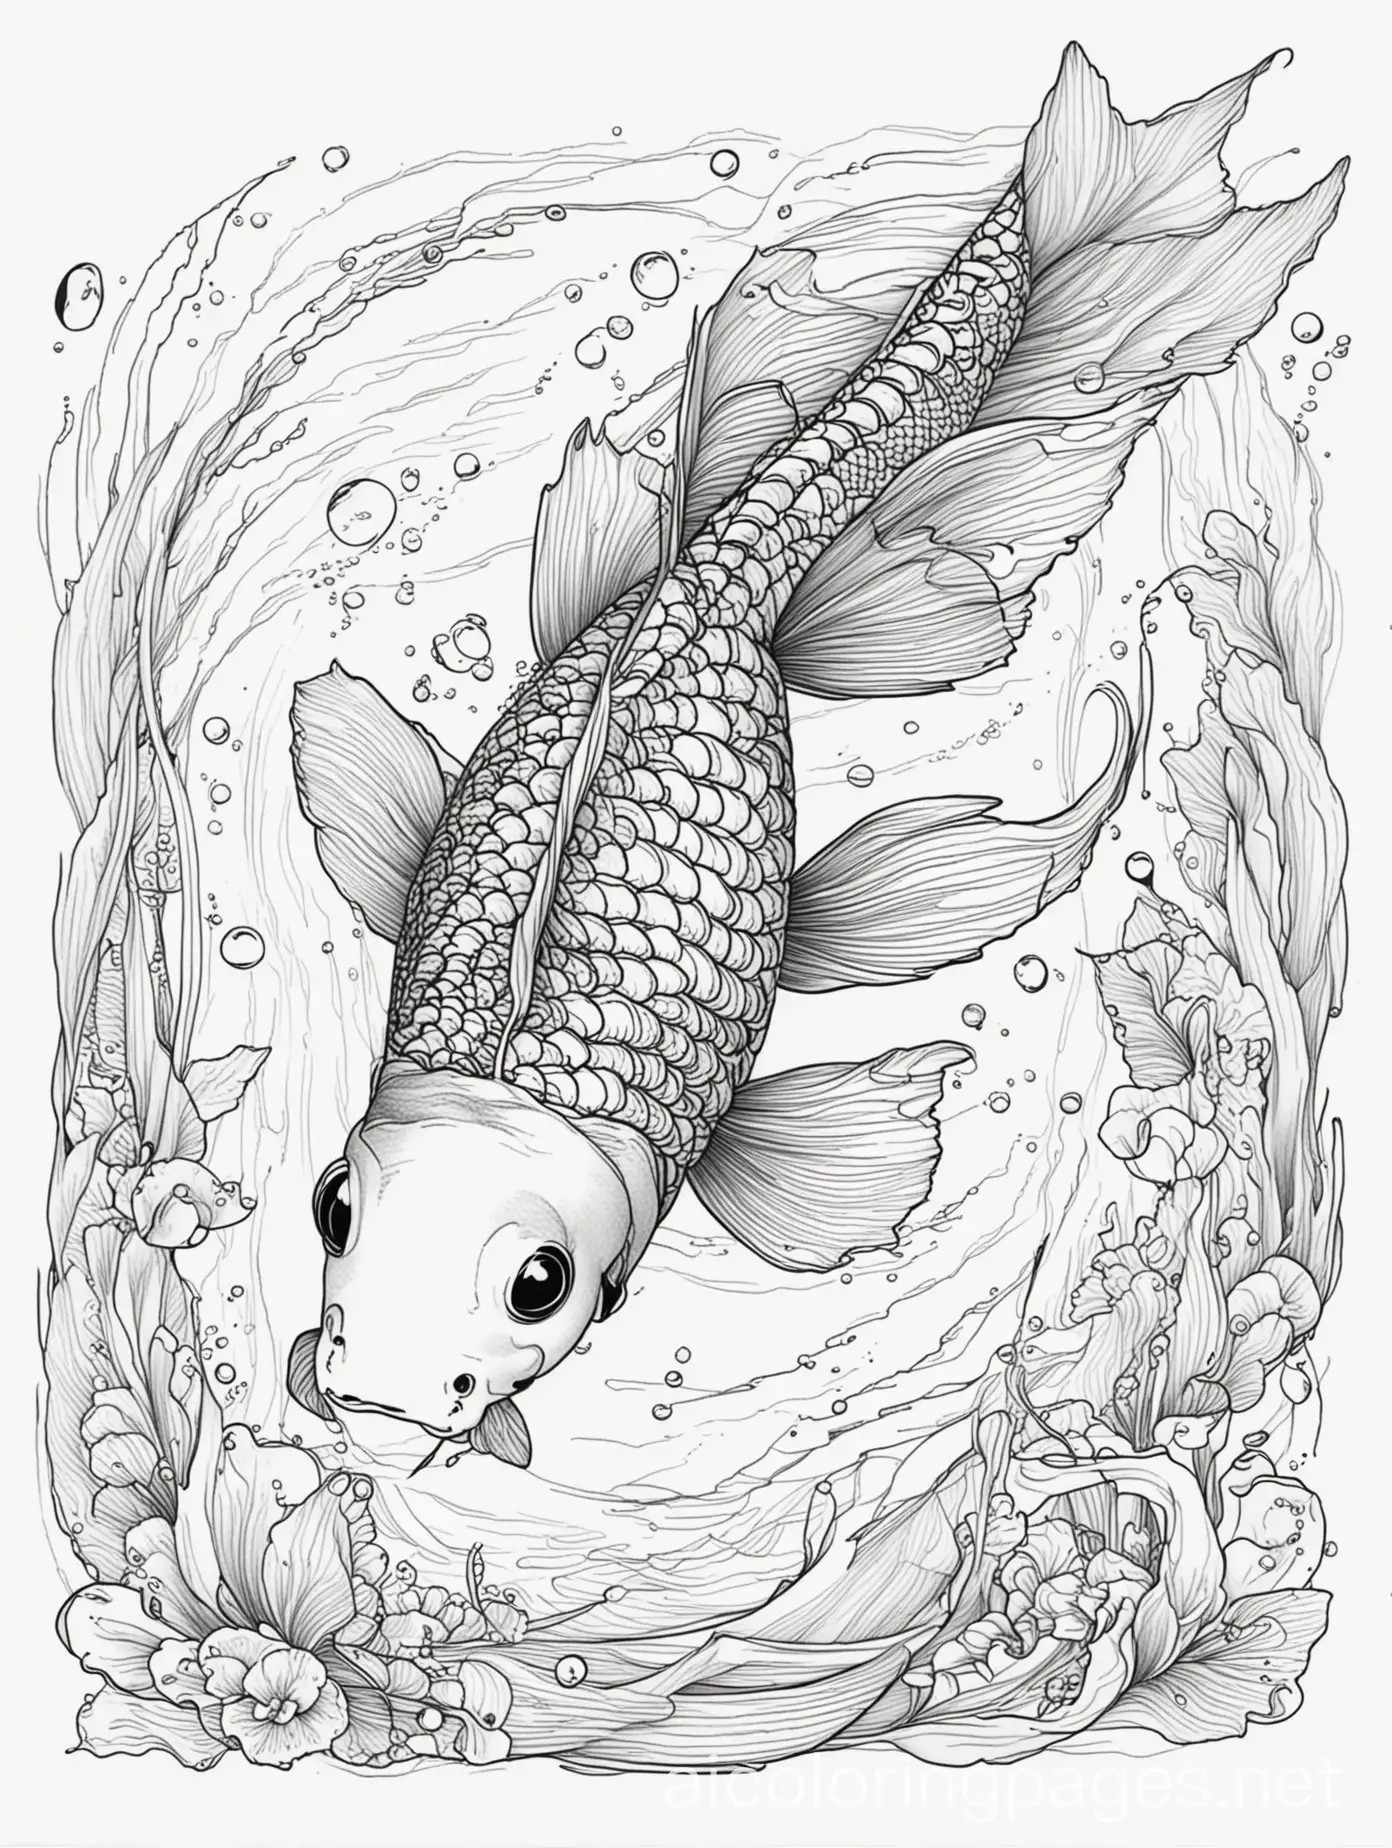 koi fish swimming, adult, , Coloring Page, black and white, line art, white background, Simplicity, Ample White Space. The background of the coloring page is plain white to make it easy for young children to color within the lines. The outlines of all the subjects are easy to distinguish, making it simple for kids to color without too much difficulty